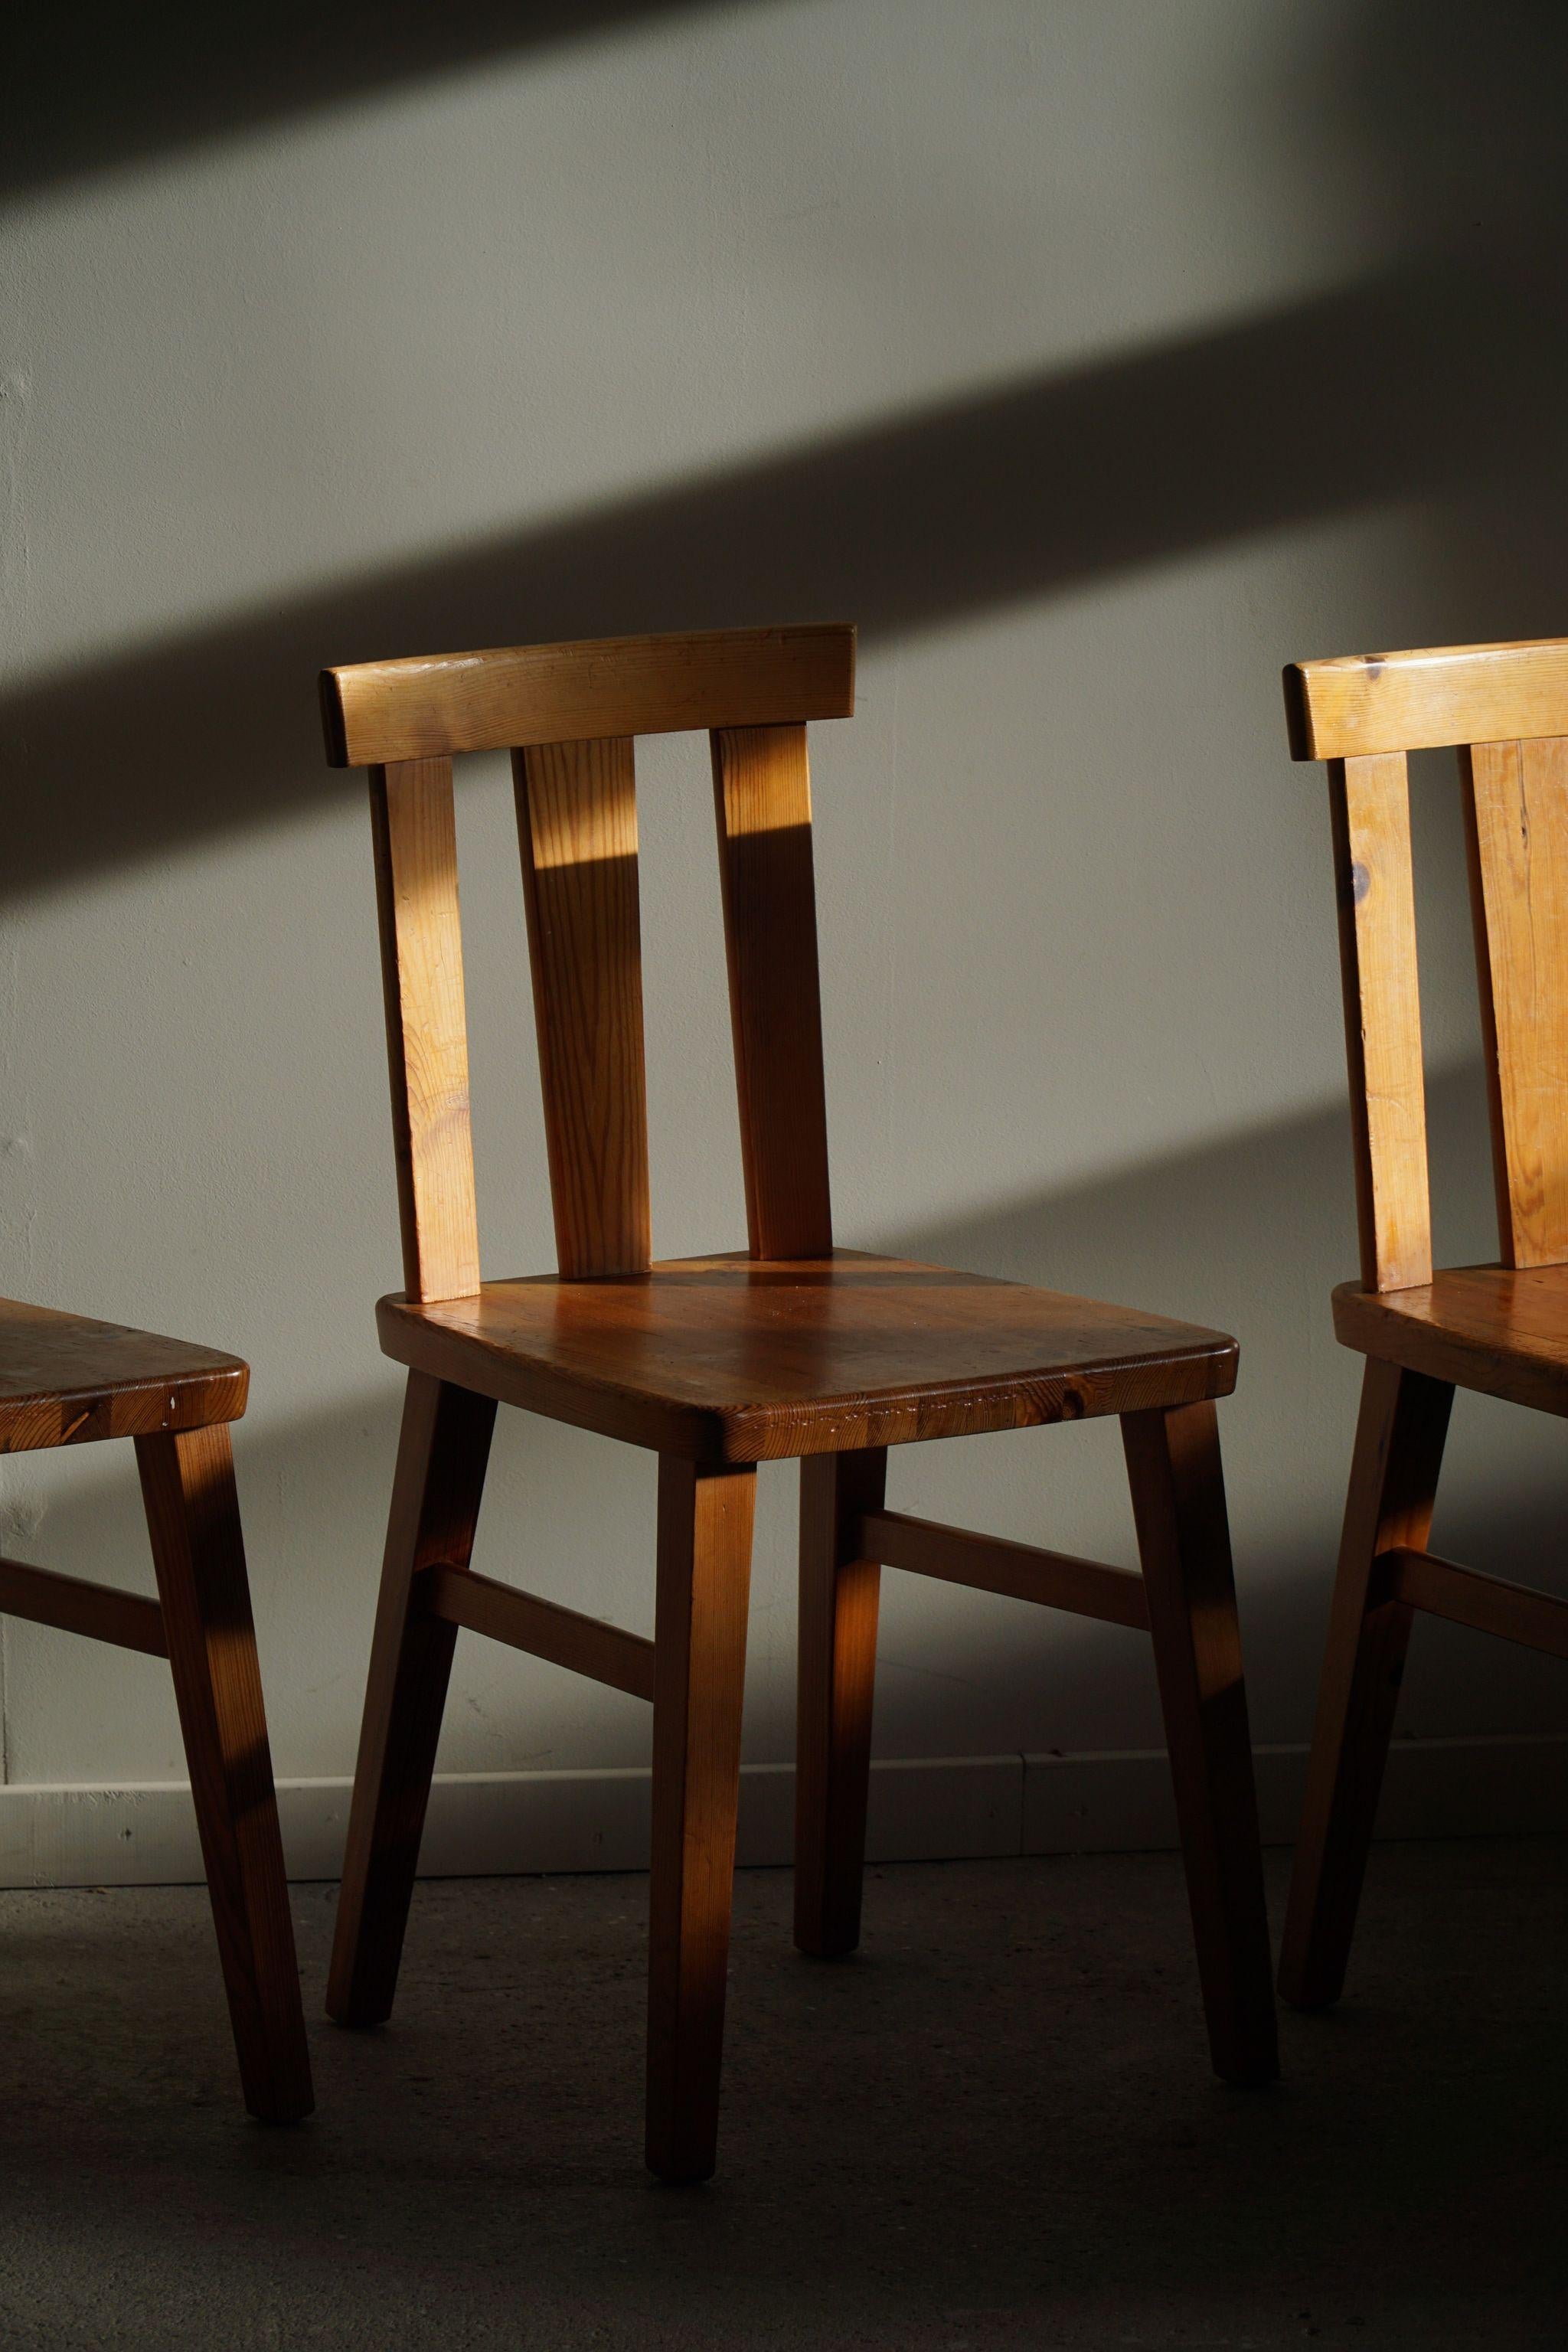 Swedish Modern, Set of 4 Chairs in Solid Pine, Axel Einar Hjorth Style, 1950s For Sale 3